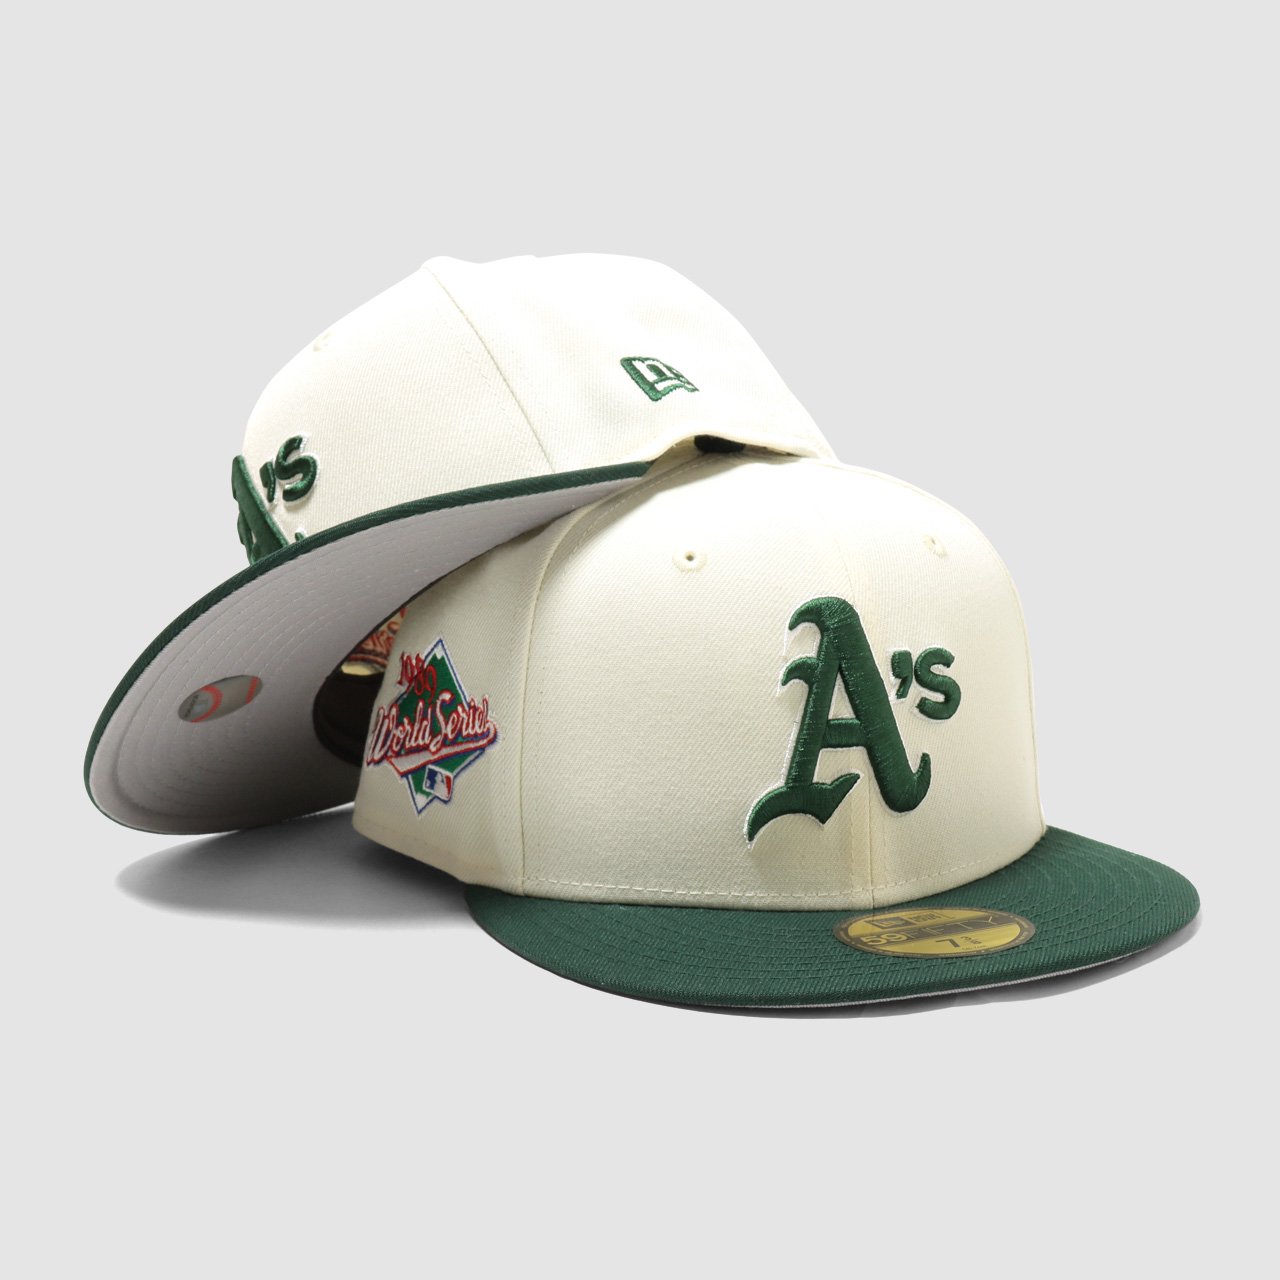 Oakland Athletics “World Series 1989” New Era 59Fifty Fitted Cap ...